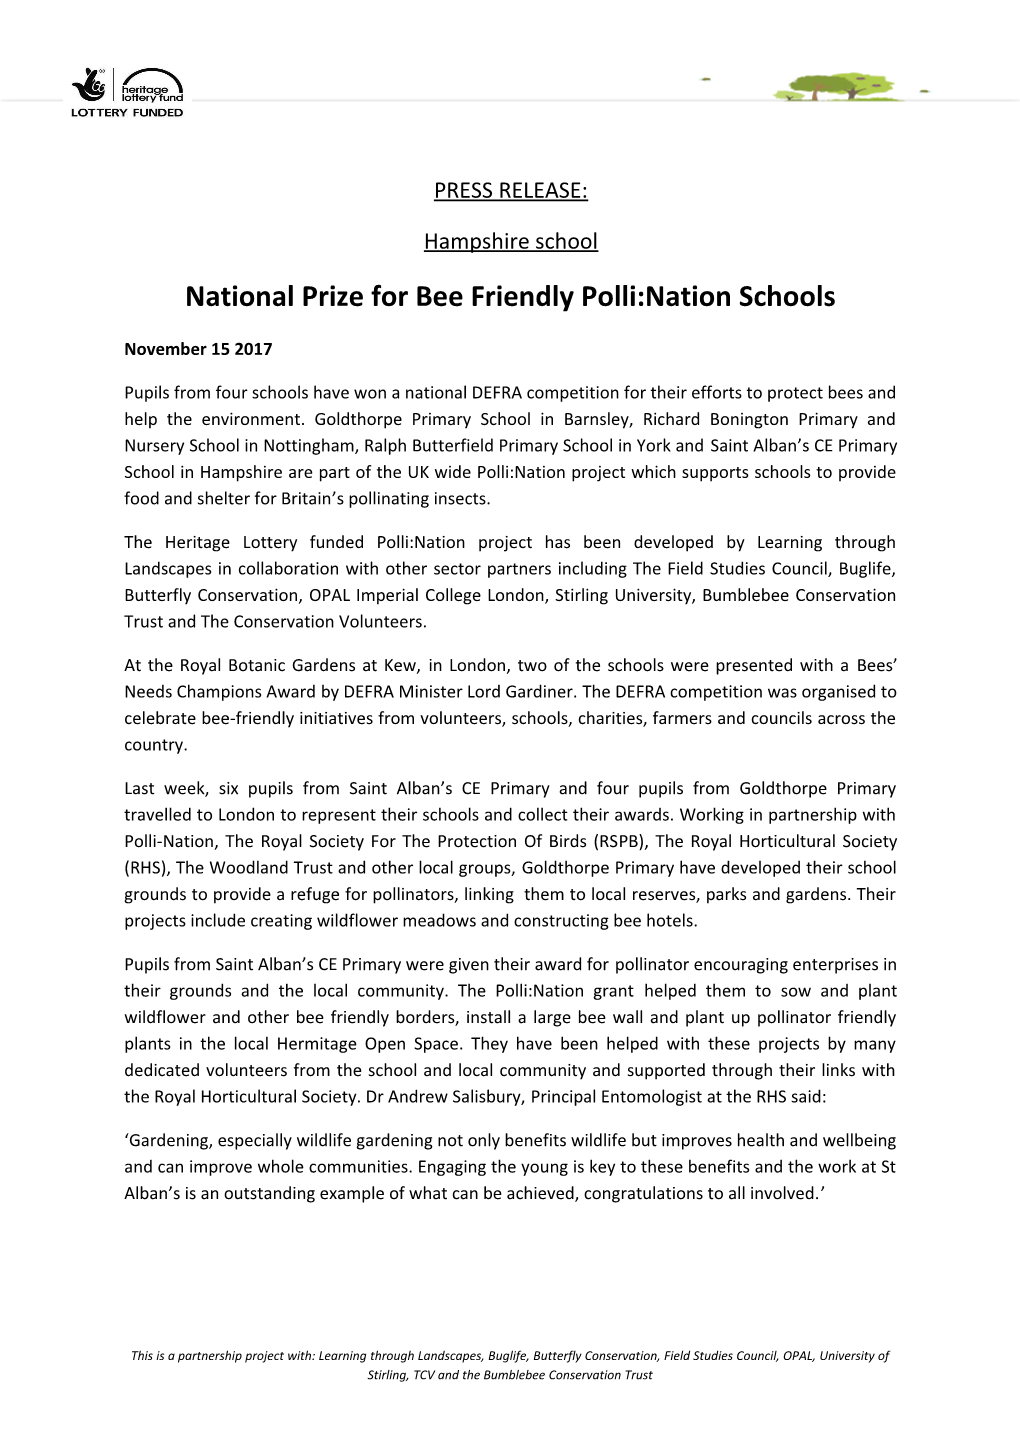 National Prize for Bee Friendly Polli:Nation Schools